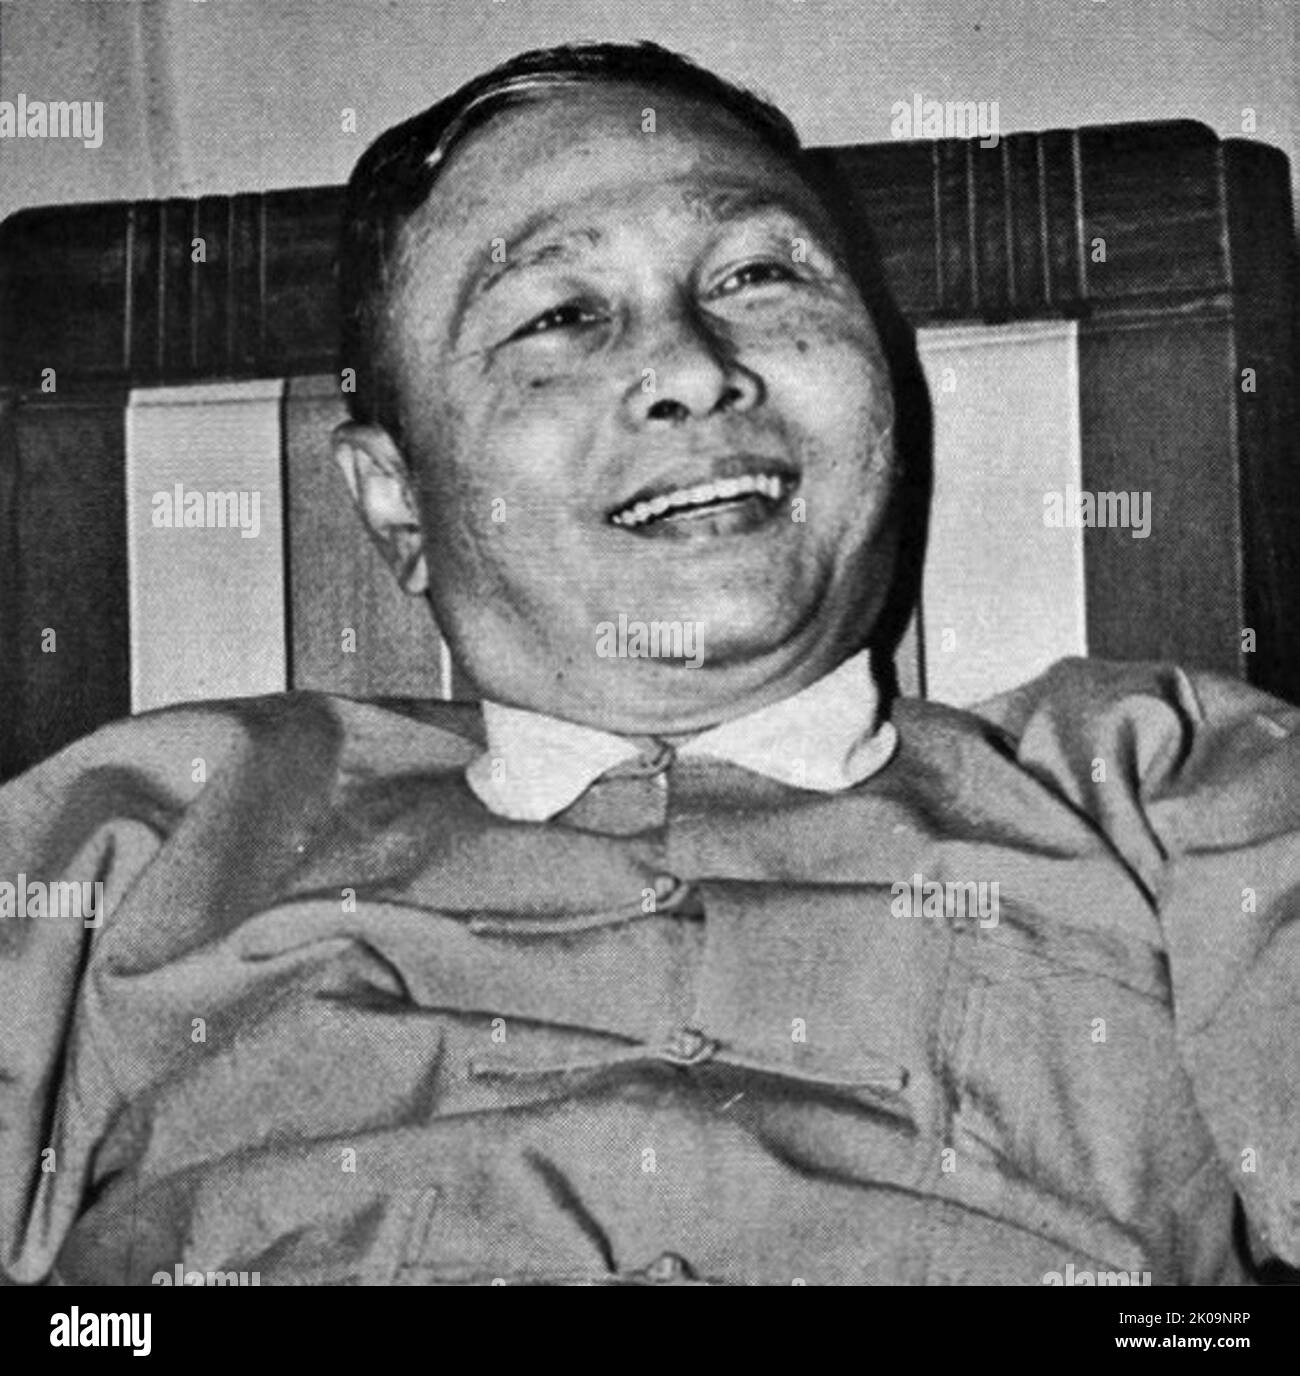 U Nu (1907 - 1995), known by the honorific name Thakin Nu, leading Burmese statesman and nationalist politician. He was the first Prime Minister of Burma under the provisions of the 1947 Constitution of the Union of Burma, from 4 January 1948 to 12 June 1956, again from 28 February 1957 to 28 October 1958, and finally from 4 April 1960 to 2 March 1962. Stock Photo